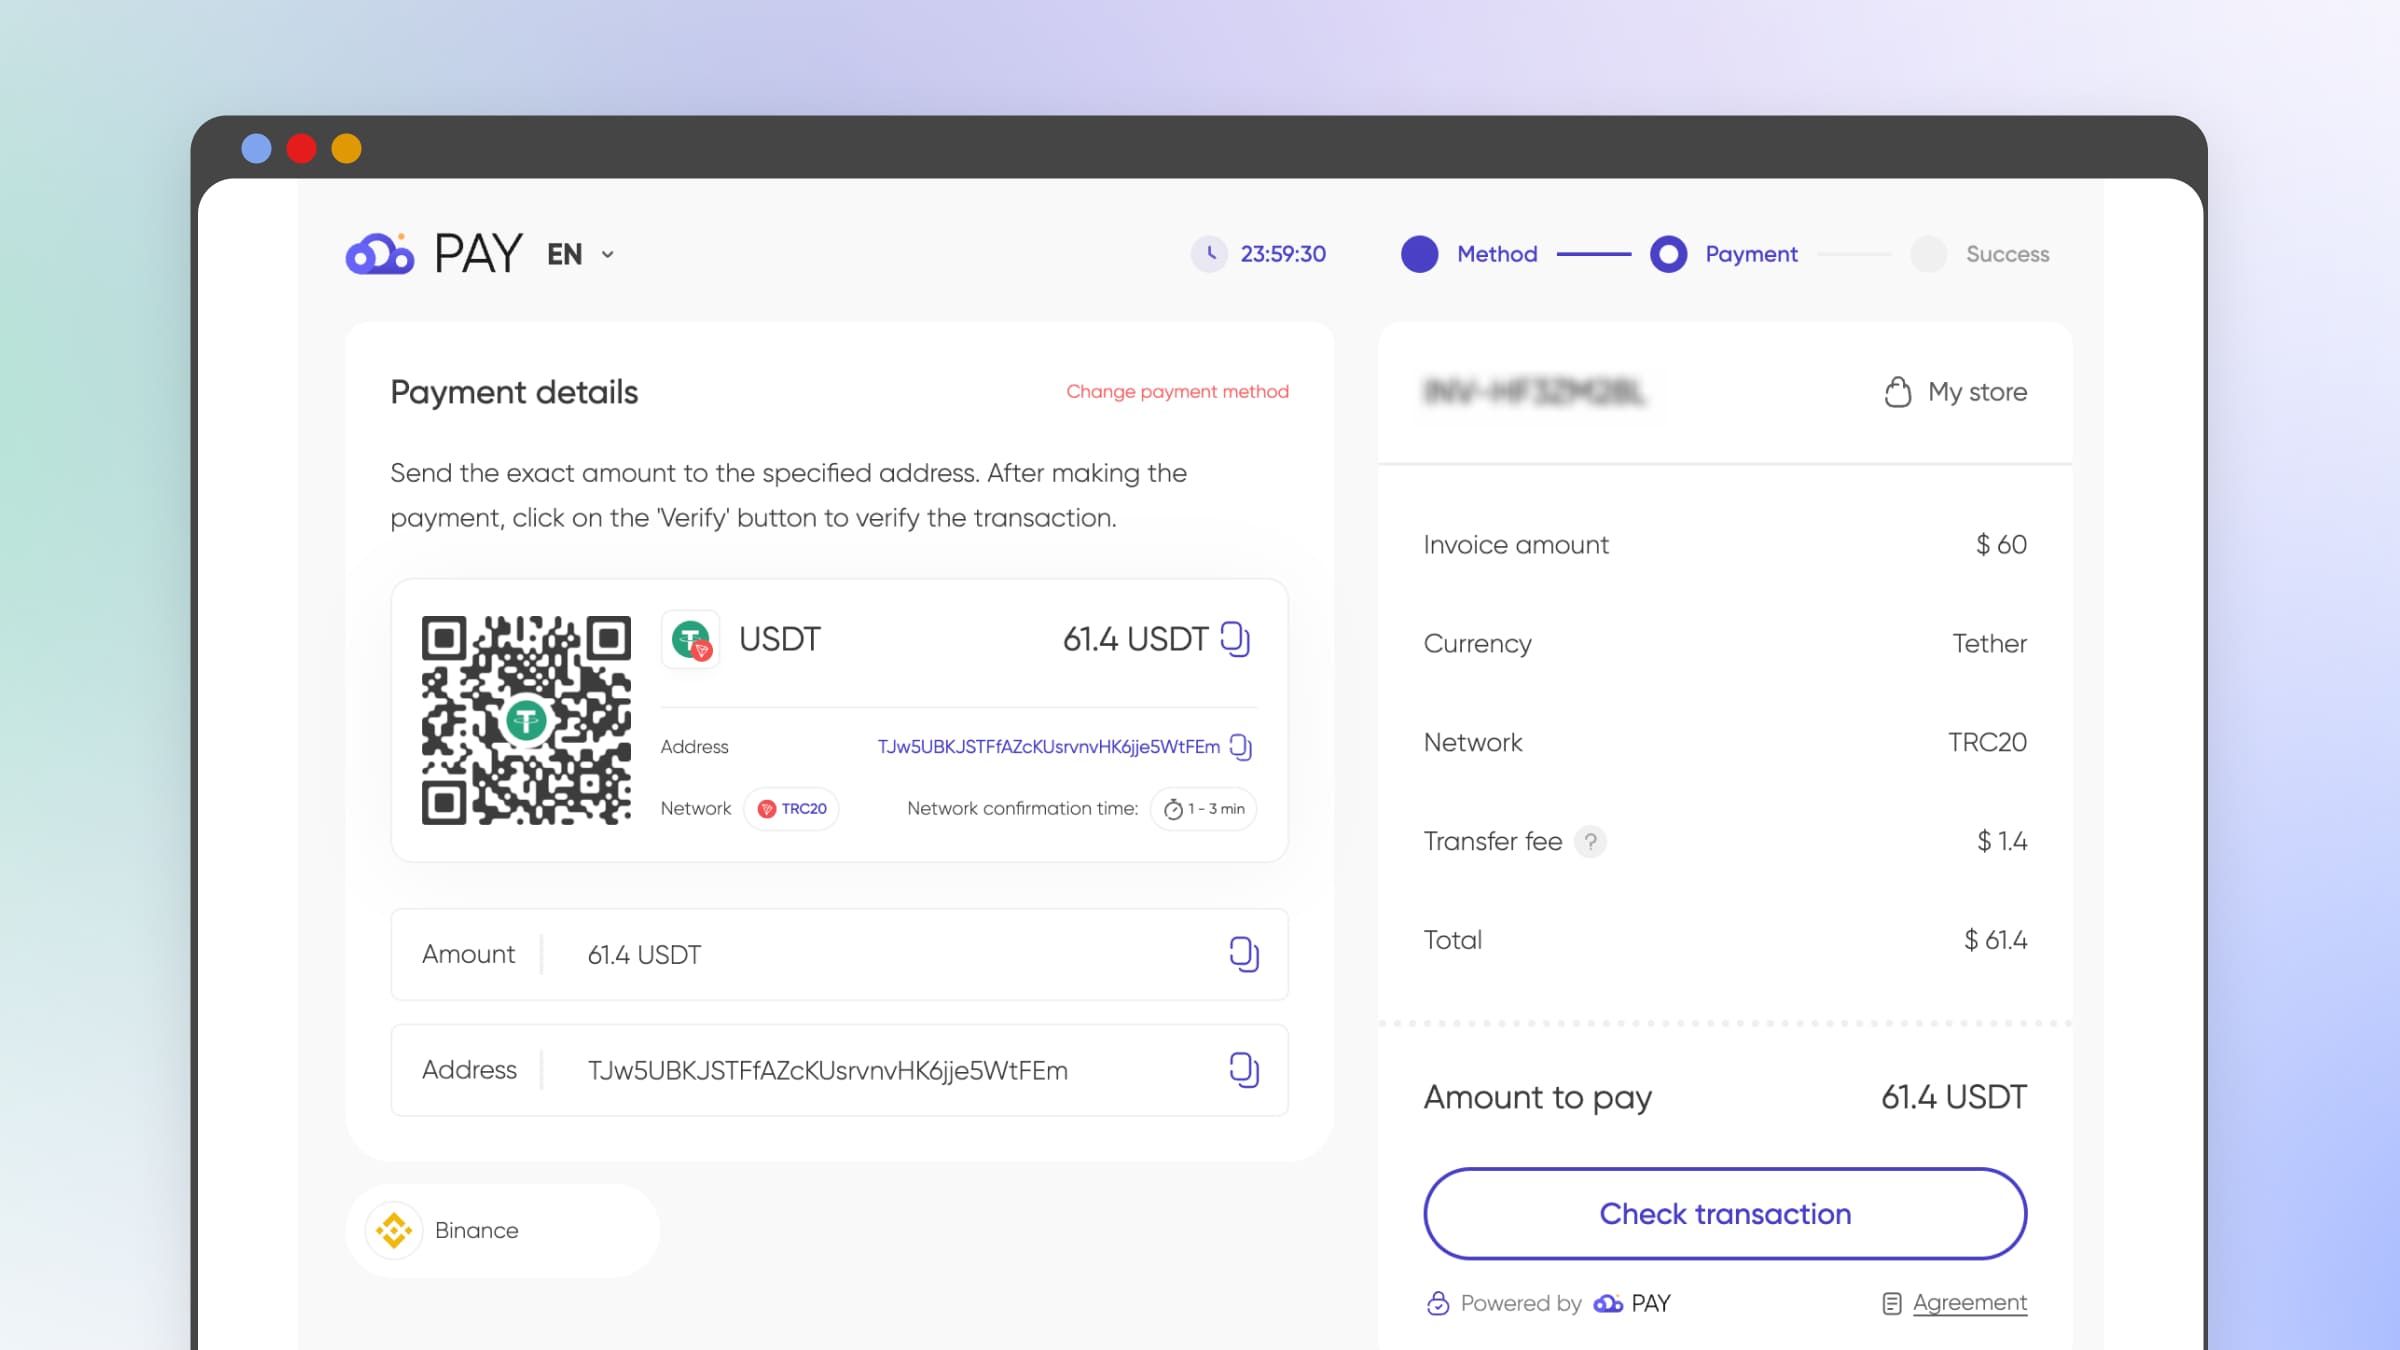 As part of the update, the CryptoCloud team has expanded the customization options for the payment page.